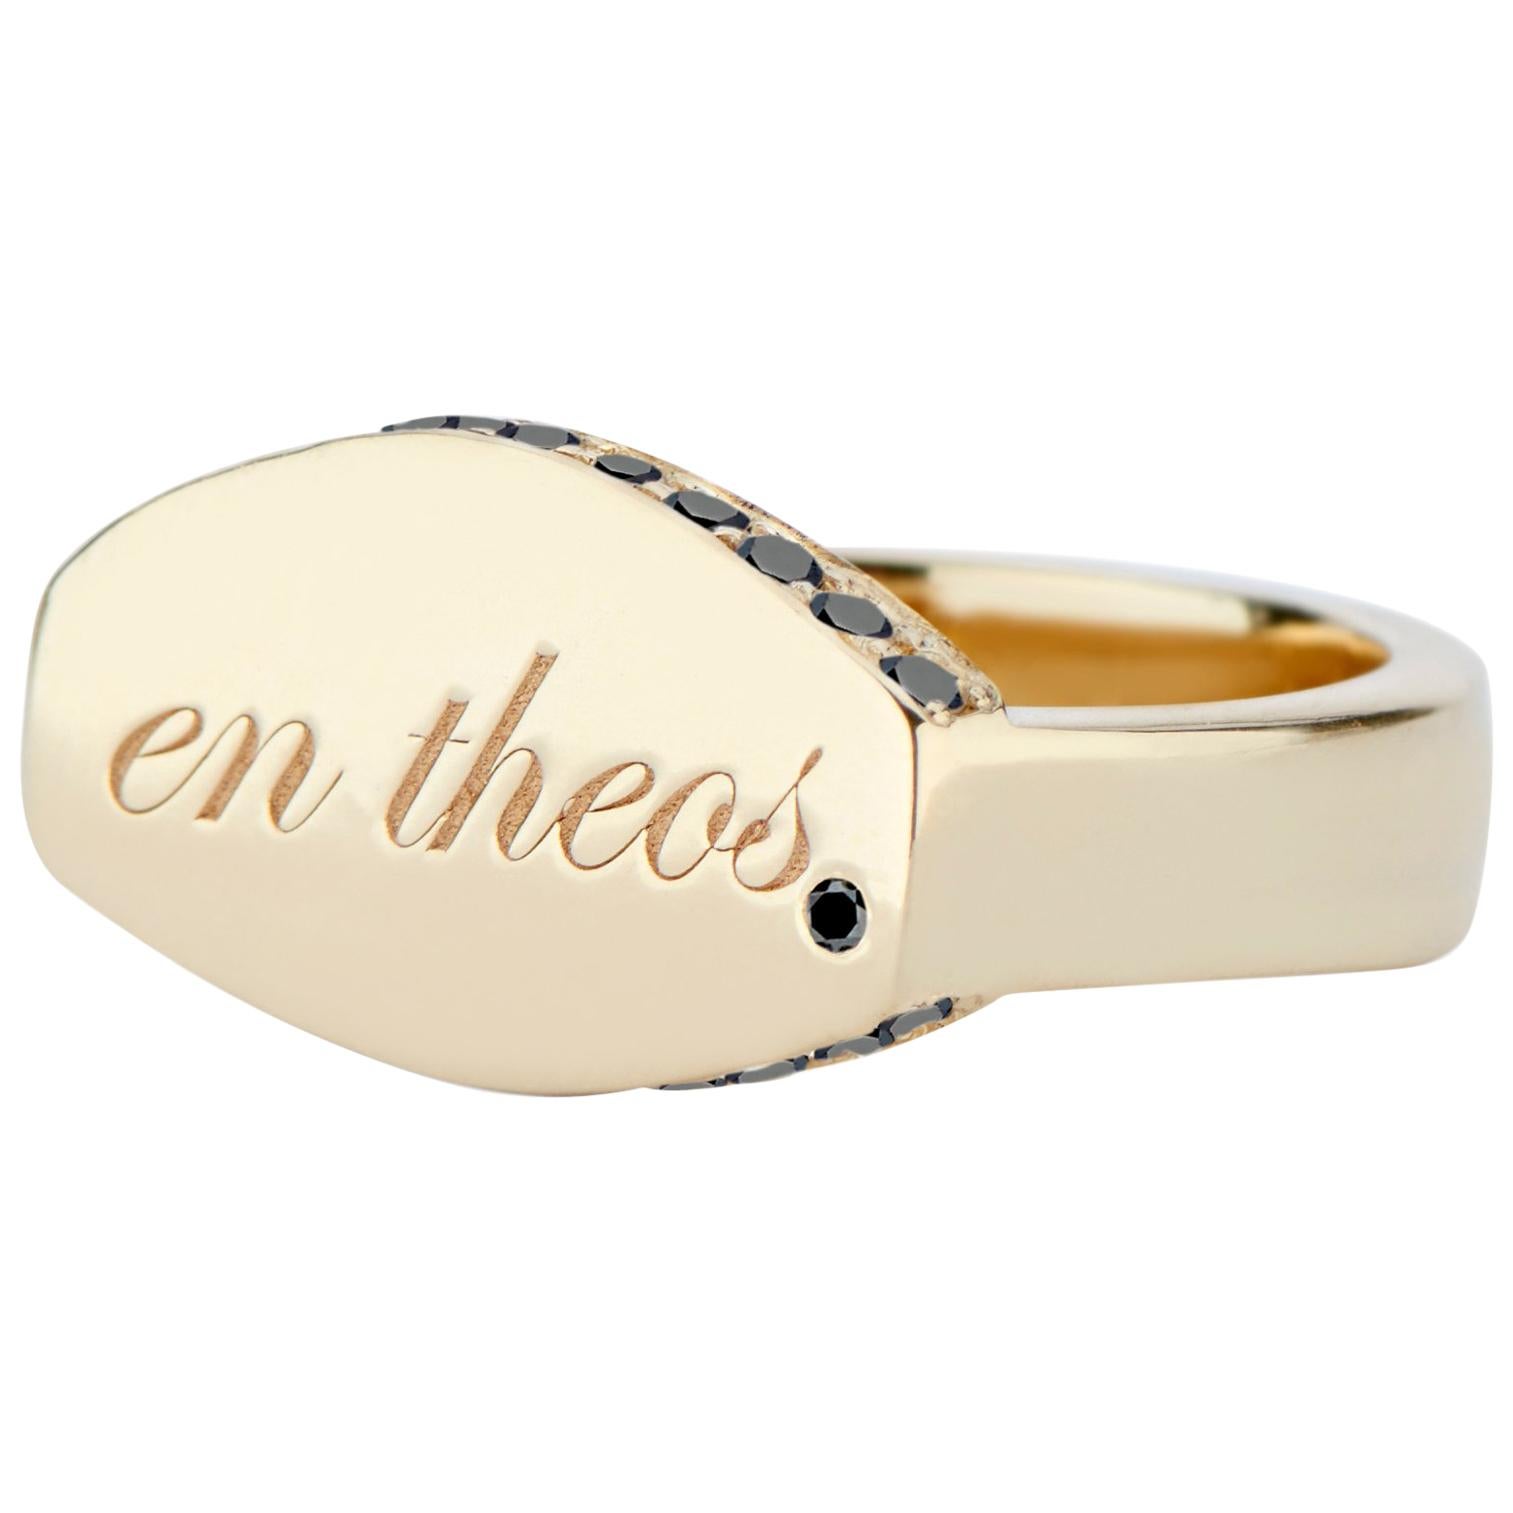 14 Karat Yellow Gold and Black Diamond En Theos "A God Within" Signet Ring For Sale